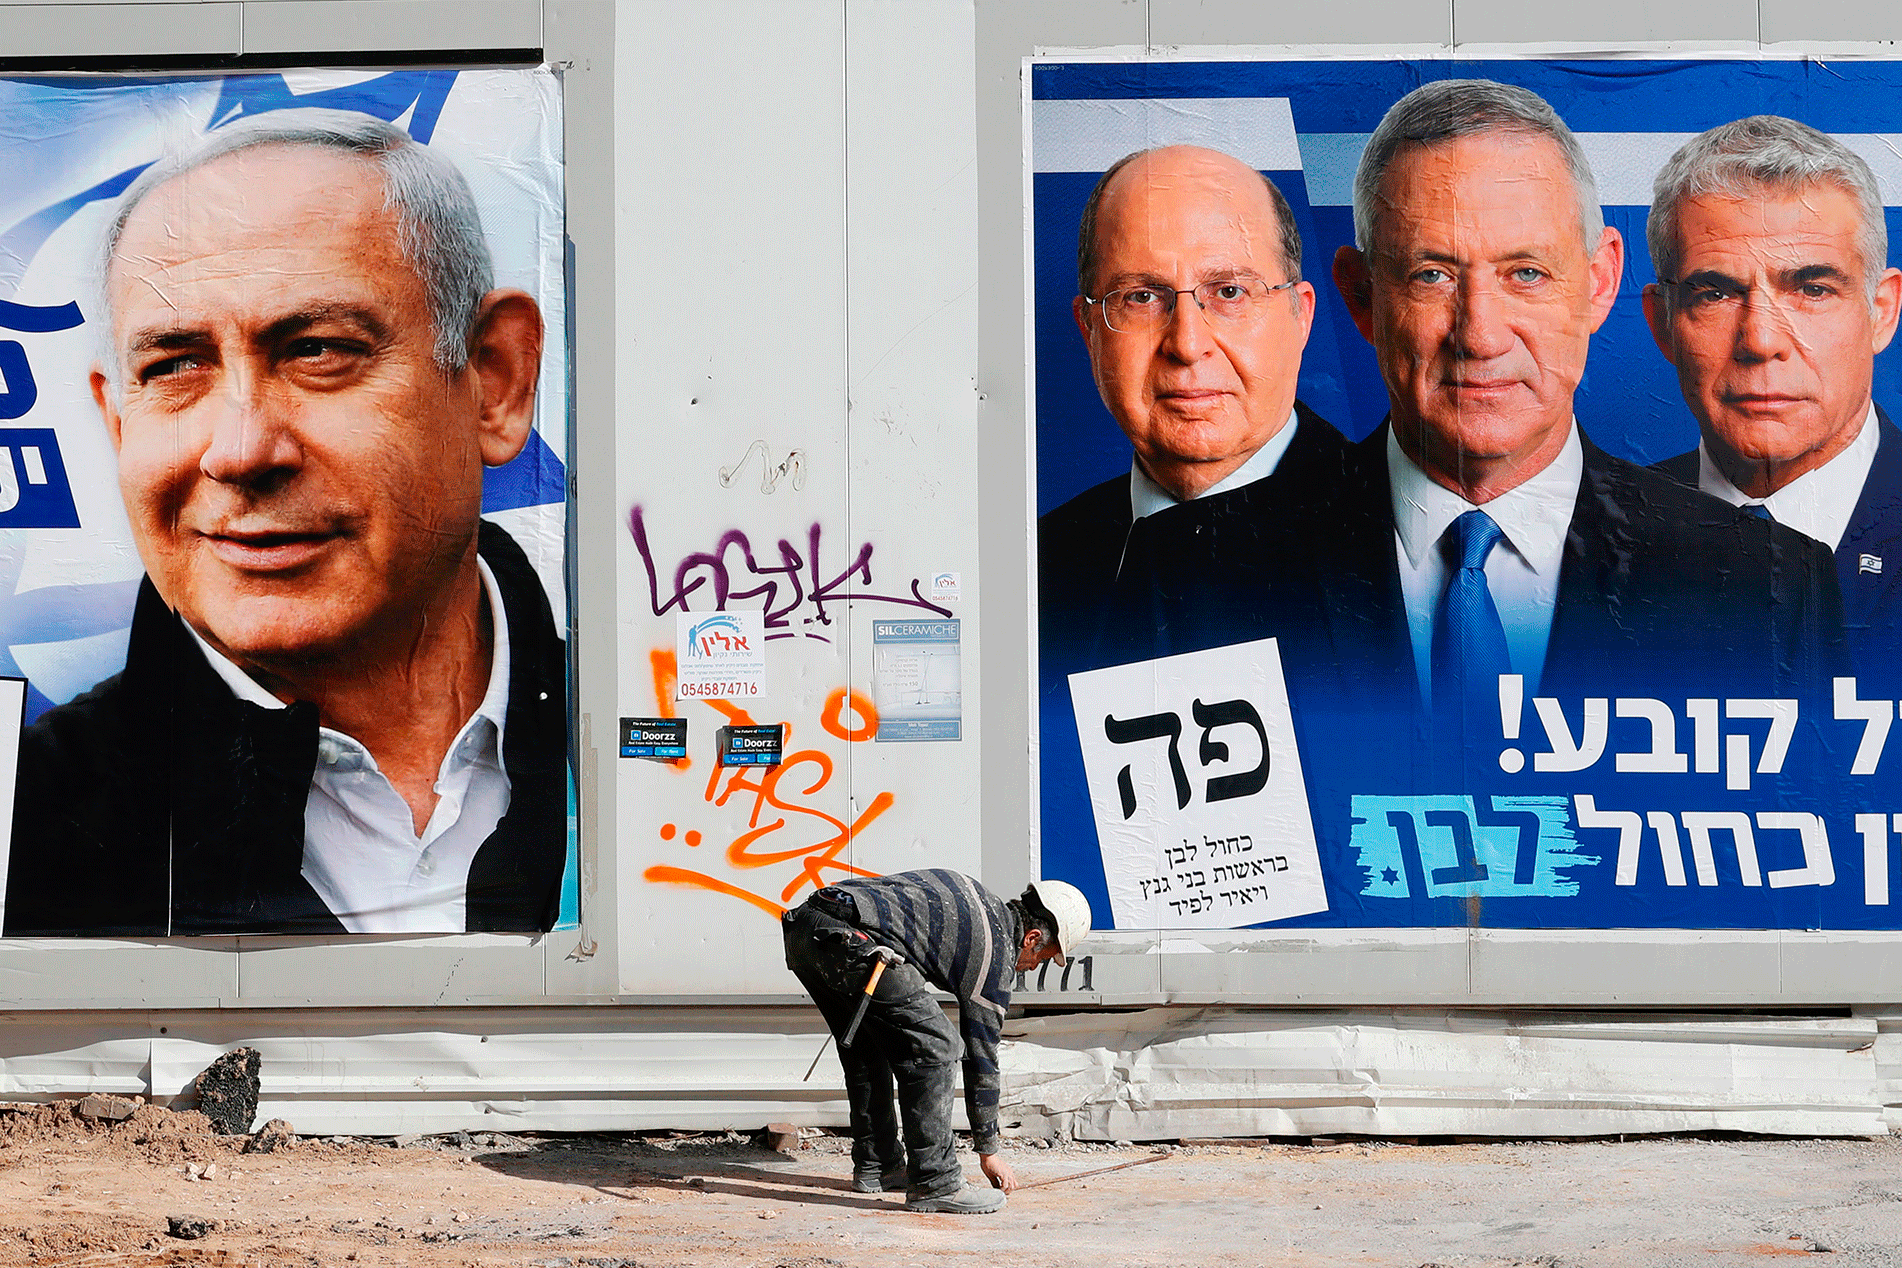 Israel to Hold Unprecedented 3rd Election in Less than Year